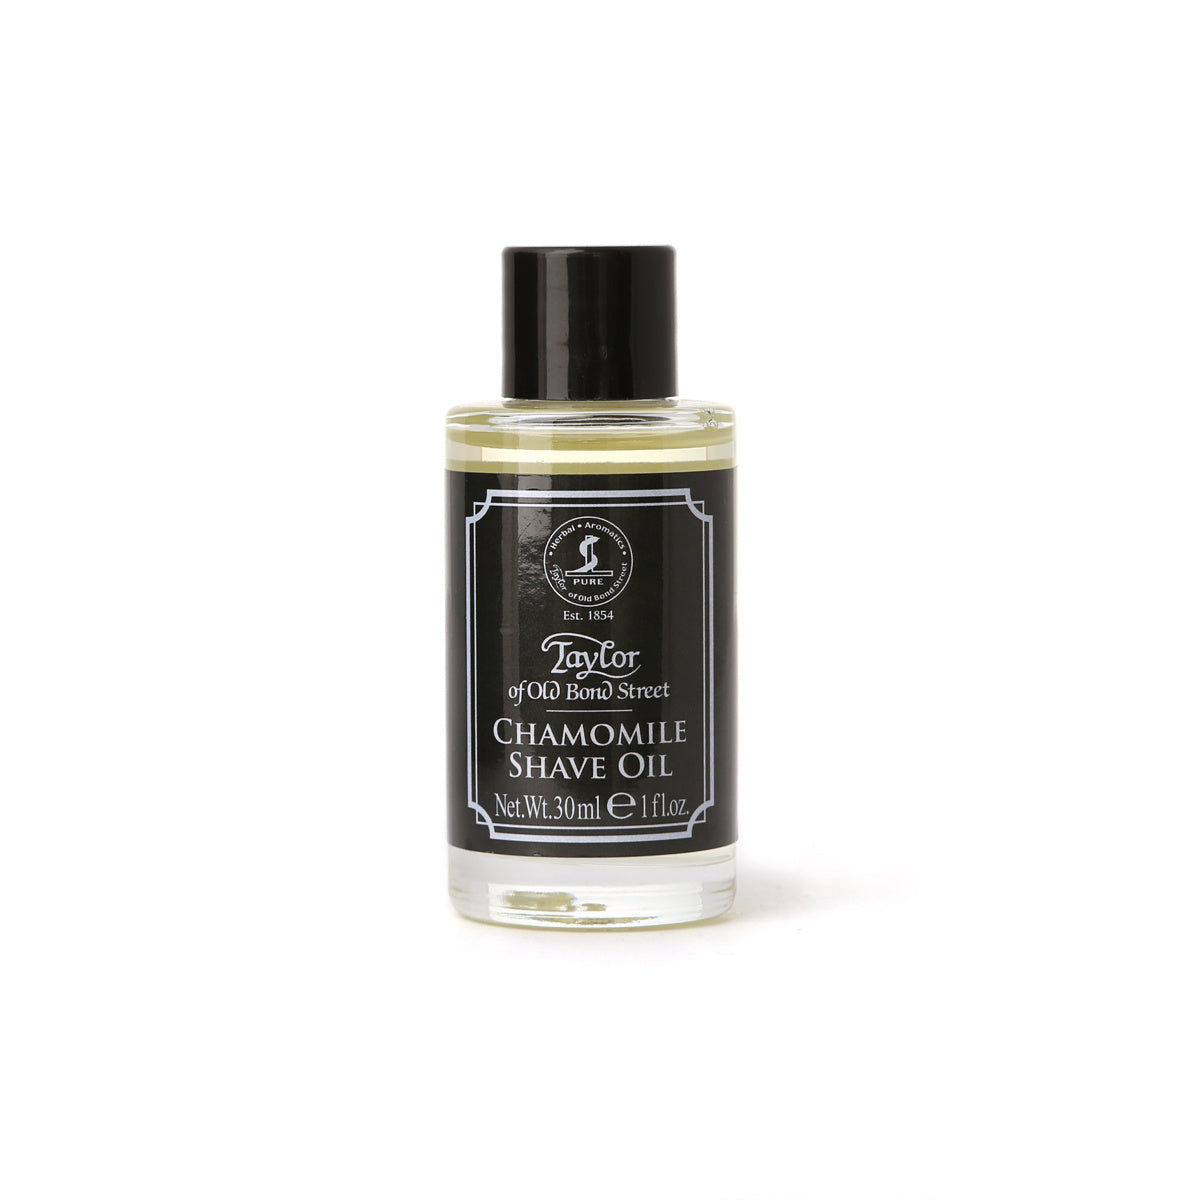 Taylor of Old Bond Street Chamomile Shave Oil 15ml - Cyril R. Salter